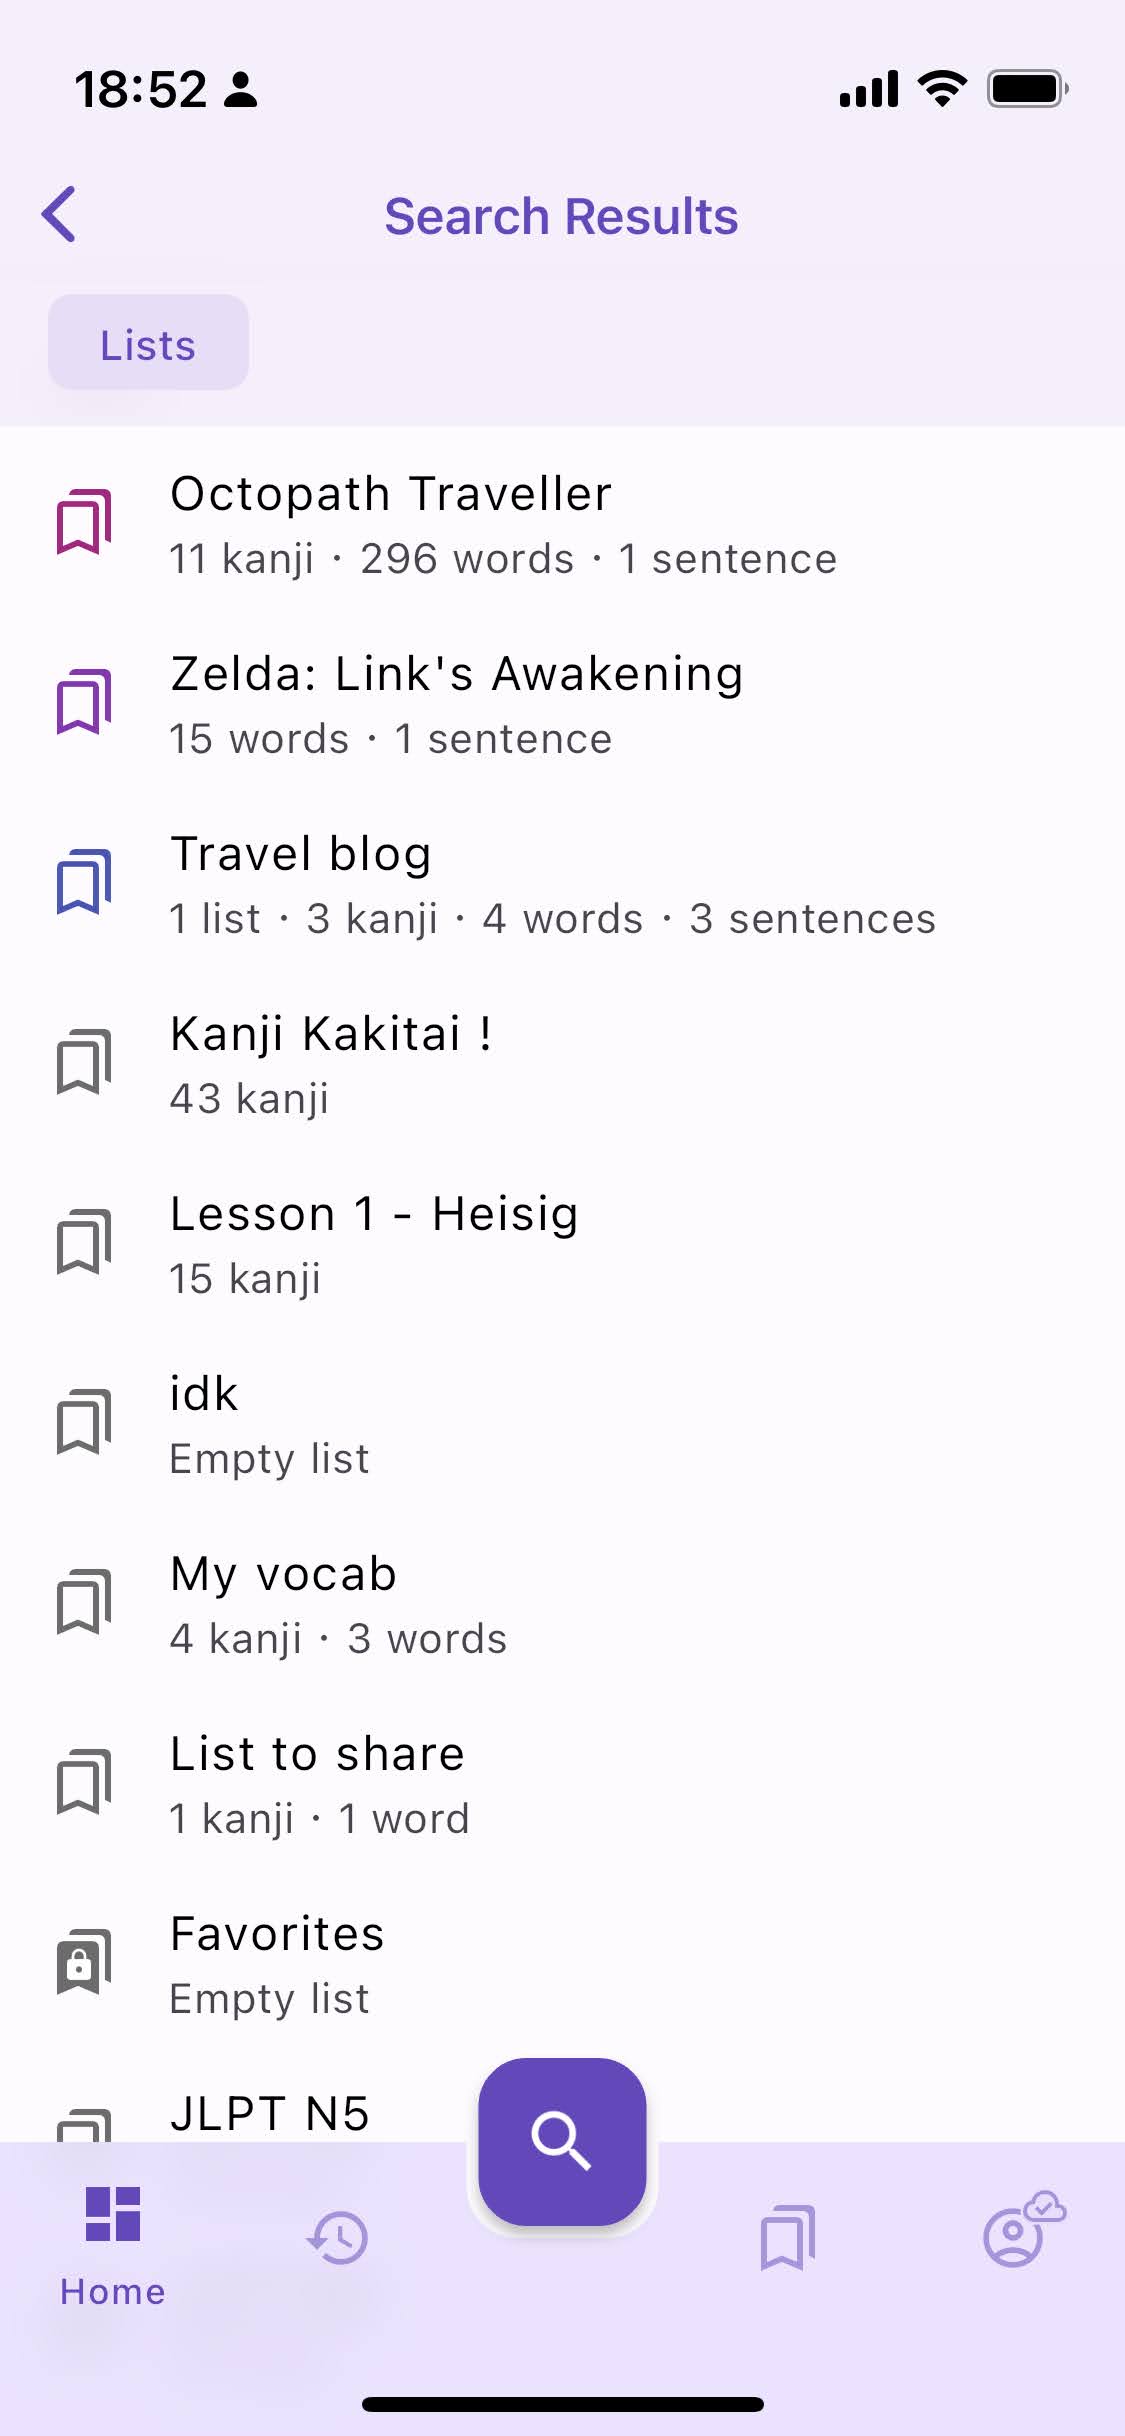 Sentence Sharing, One-tap Bookmark, User Profiles, and more